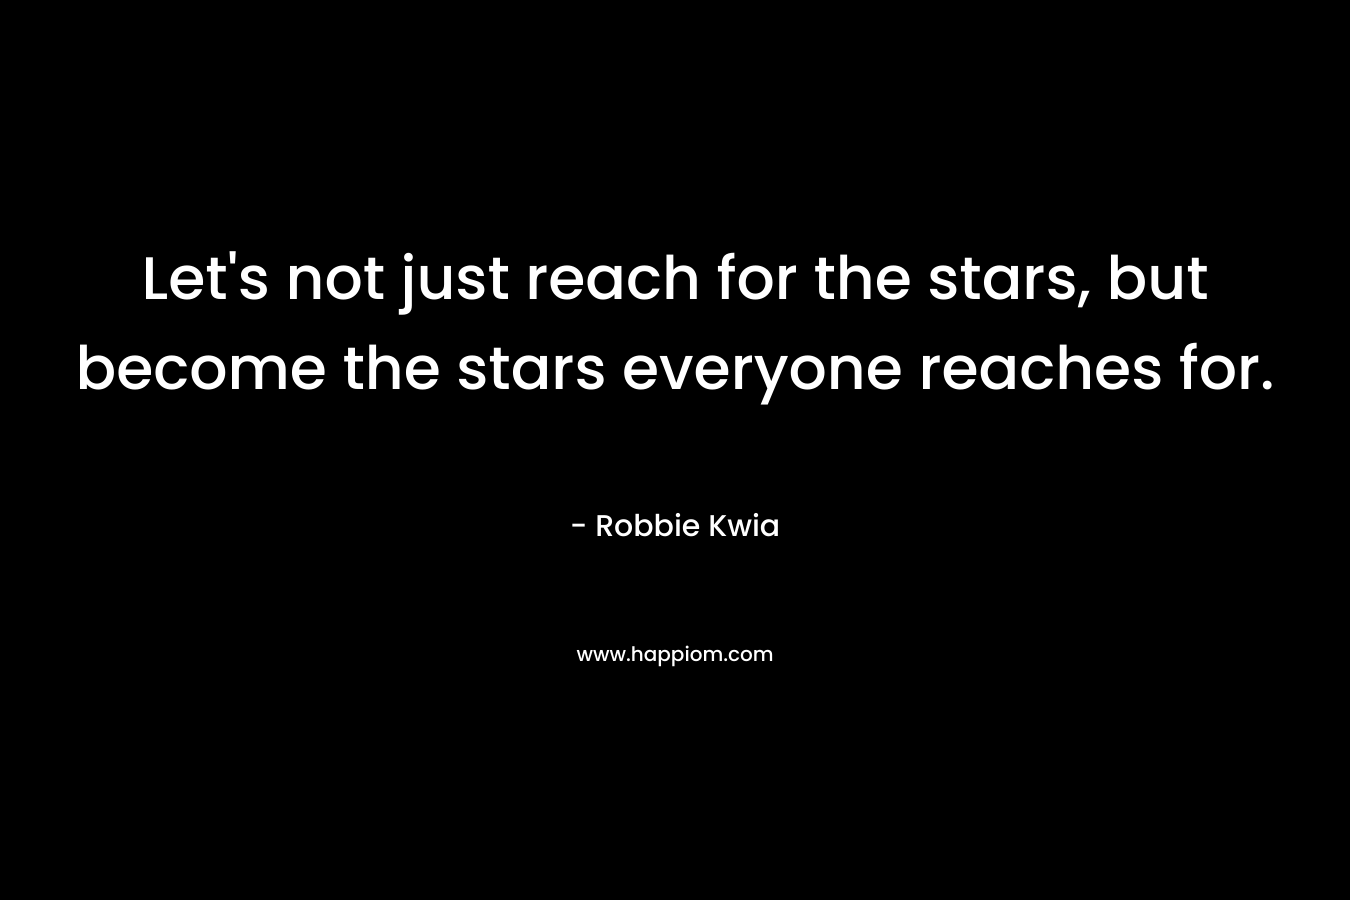 Let's not just reach for the stars, but become the stars everyone reaches for.